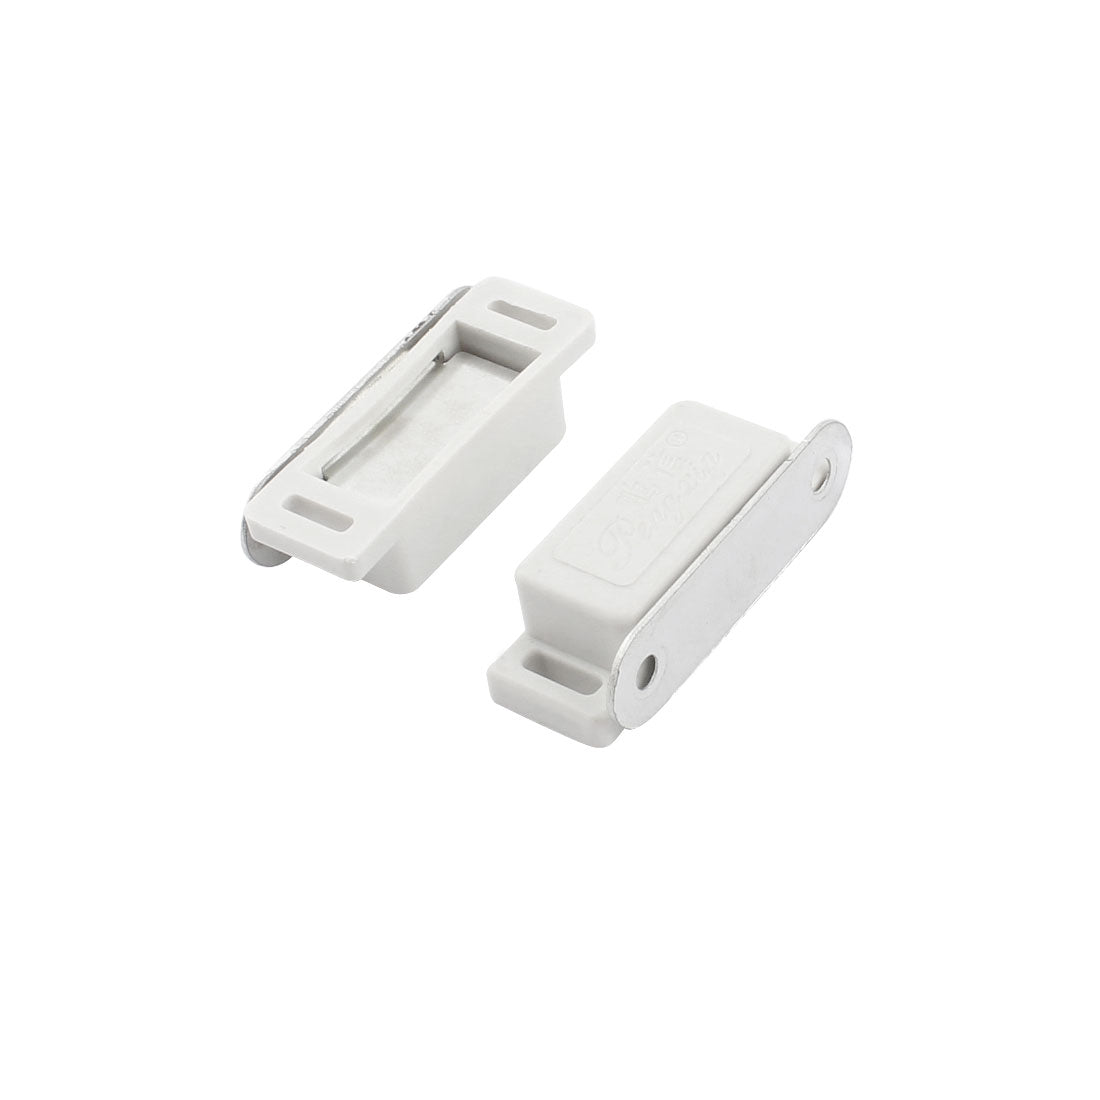 uxcell Uxcell 2 Pcs White Plastic Shell Metal Plate Cabinet Door Magnetic Catch Set 1.7"